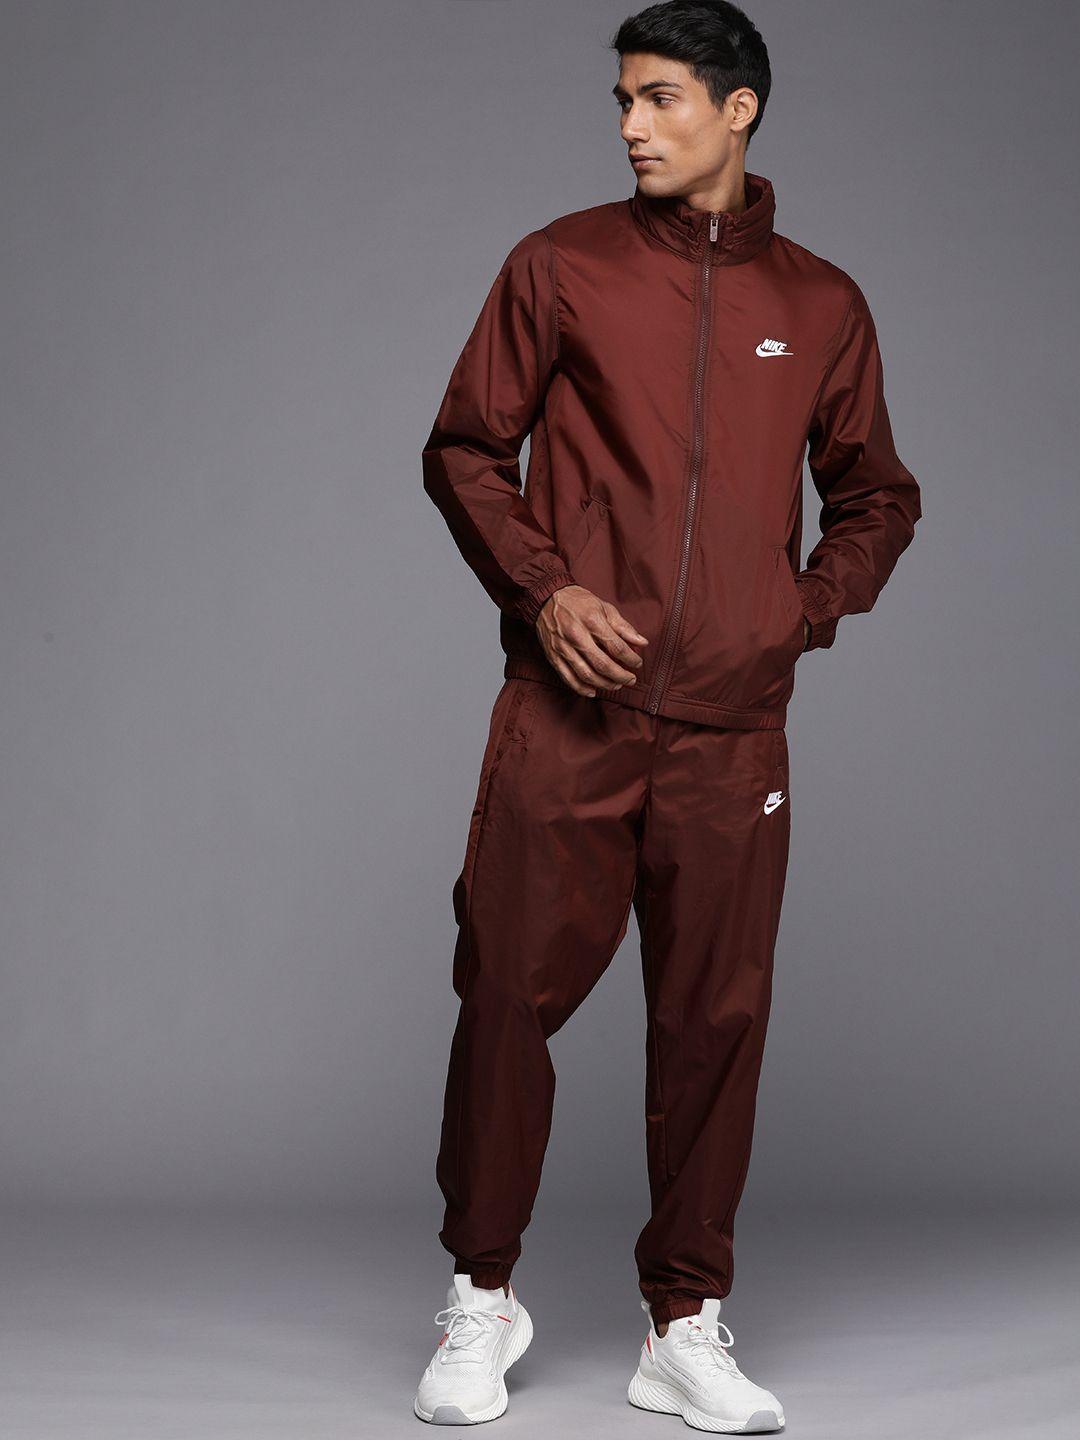 nike-men-rust-brown-brand-logo-embroidered-club-lnd-wvn-tracksuit